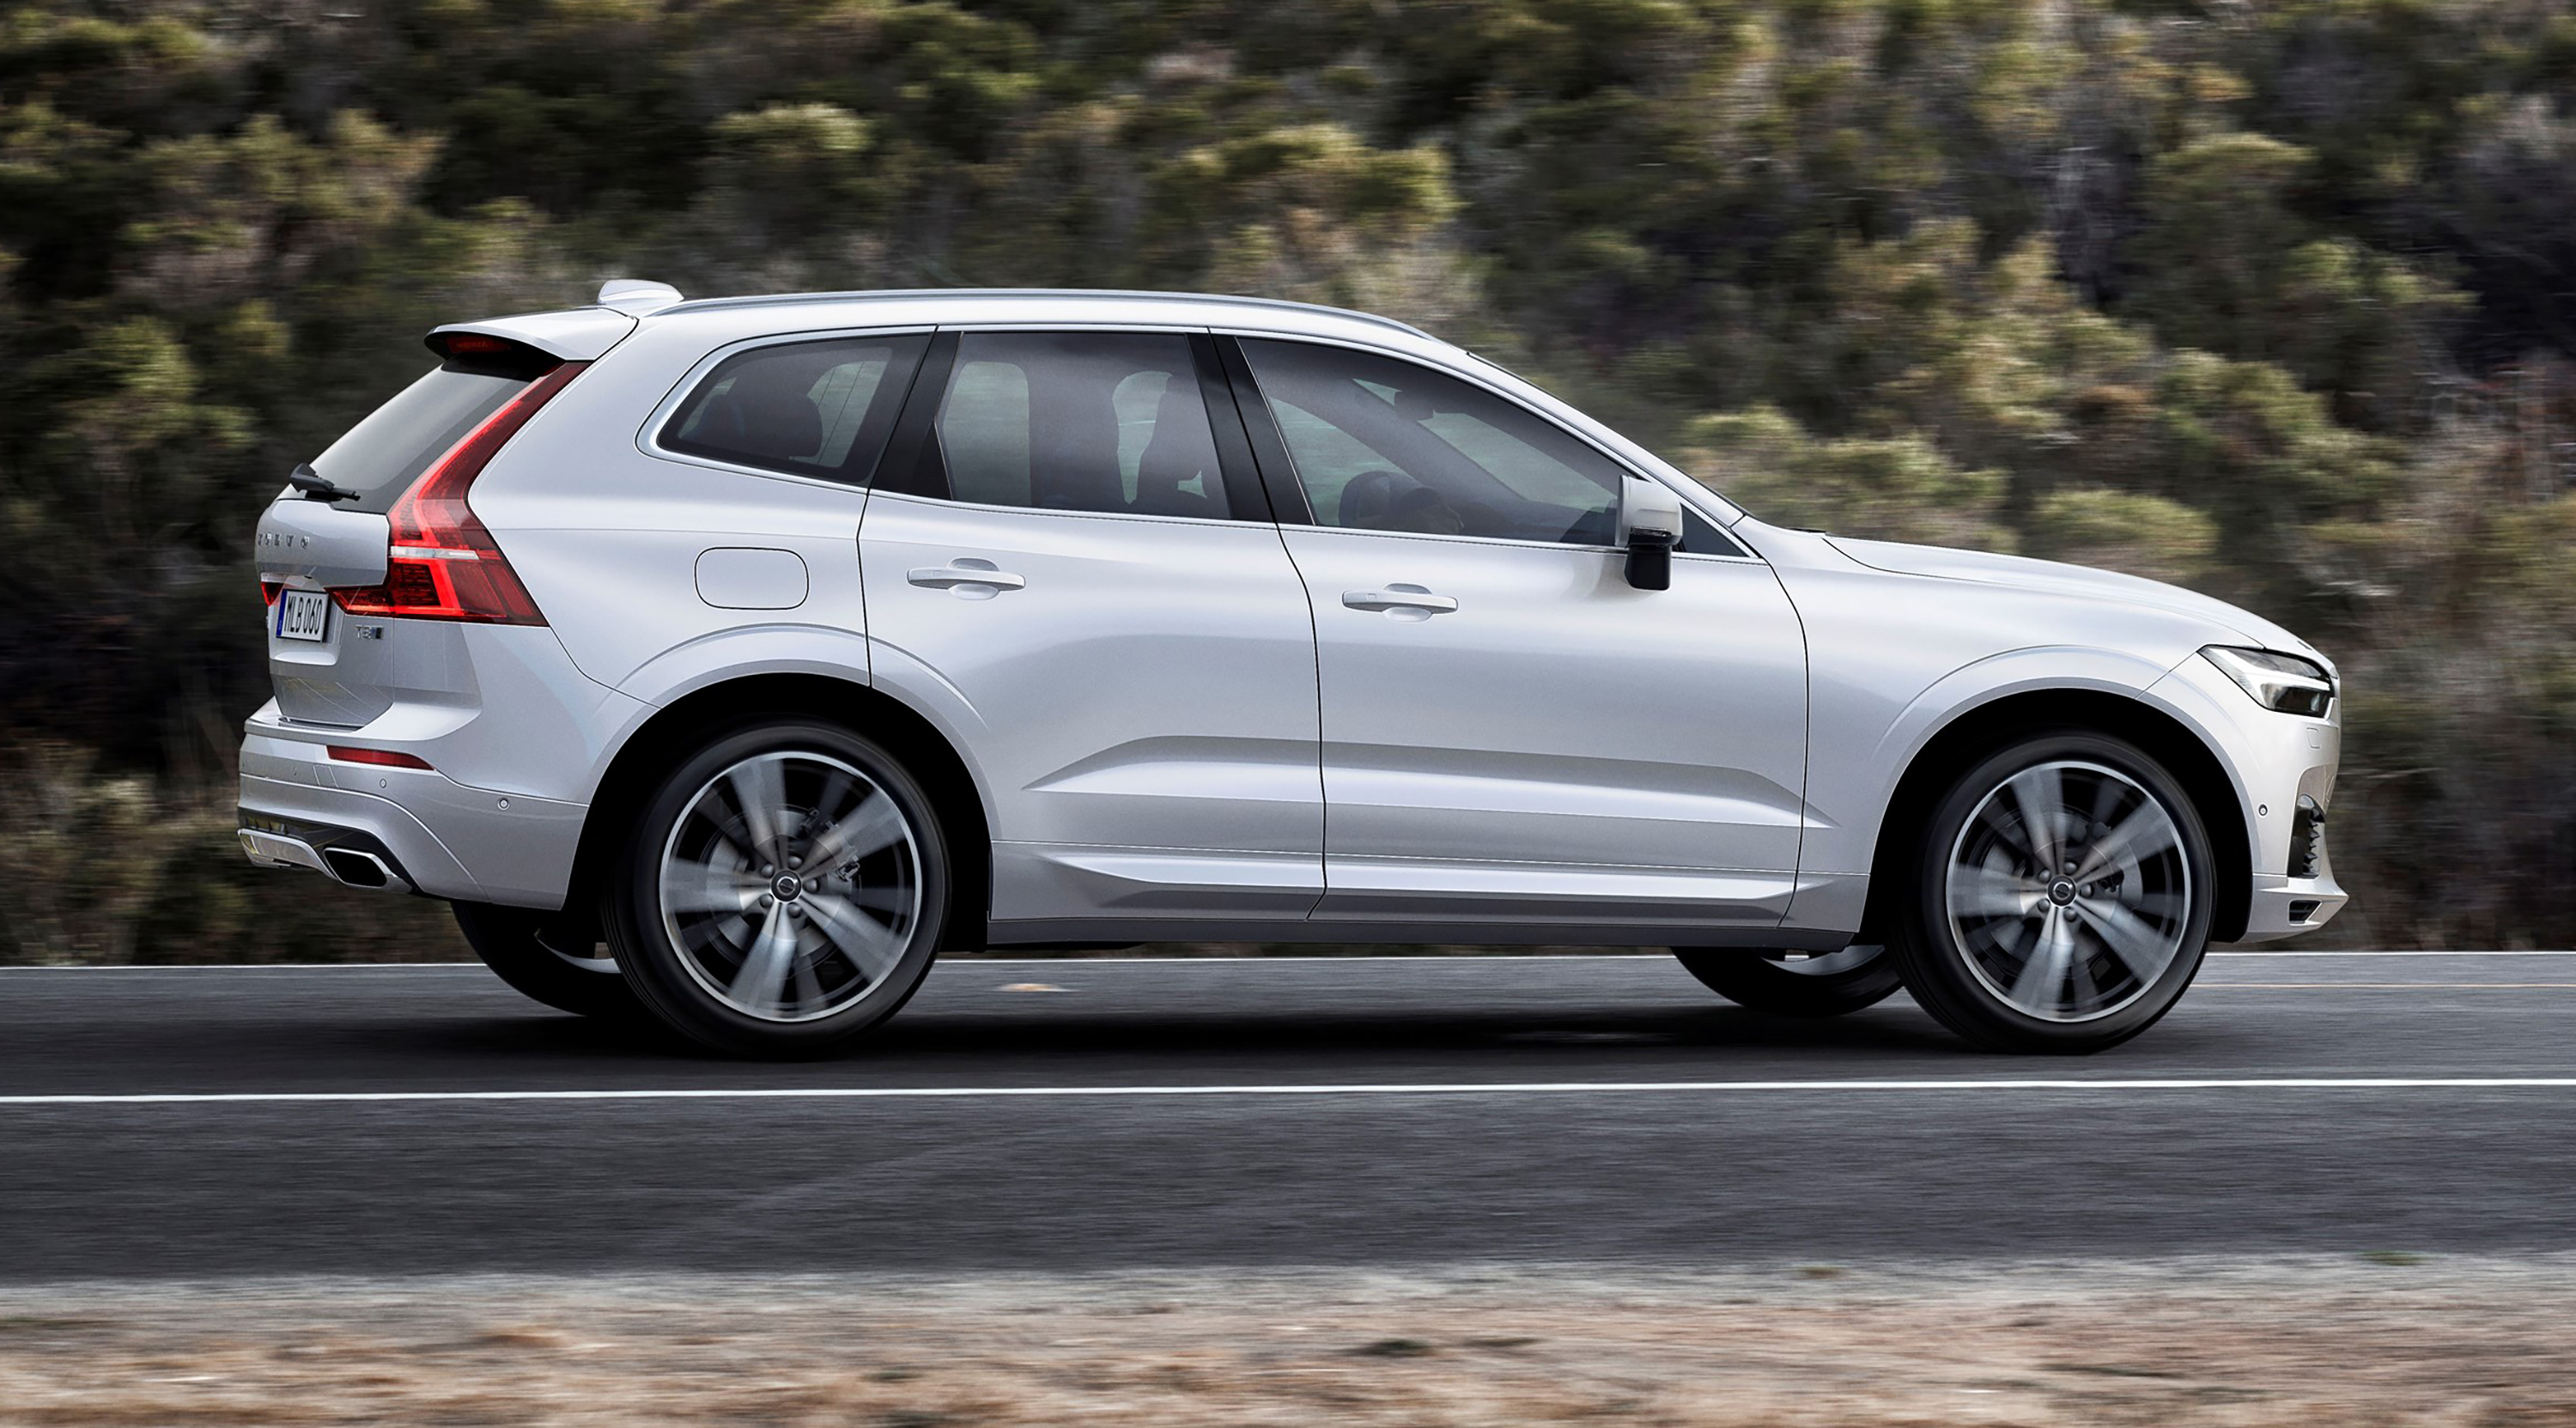 2018 Volvo XC60 detailed in new video Photos (1 of 5)